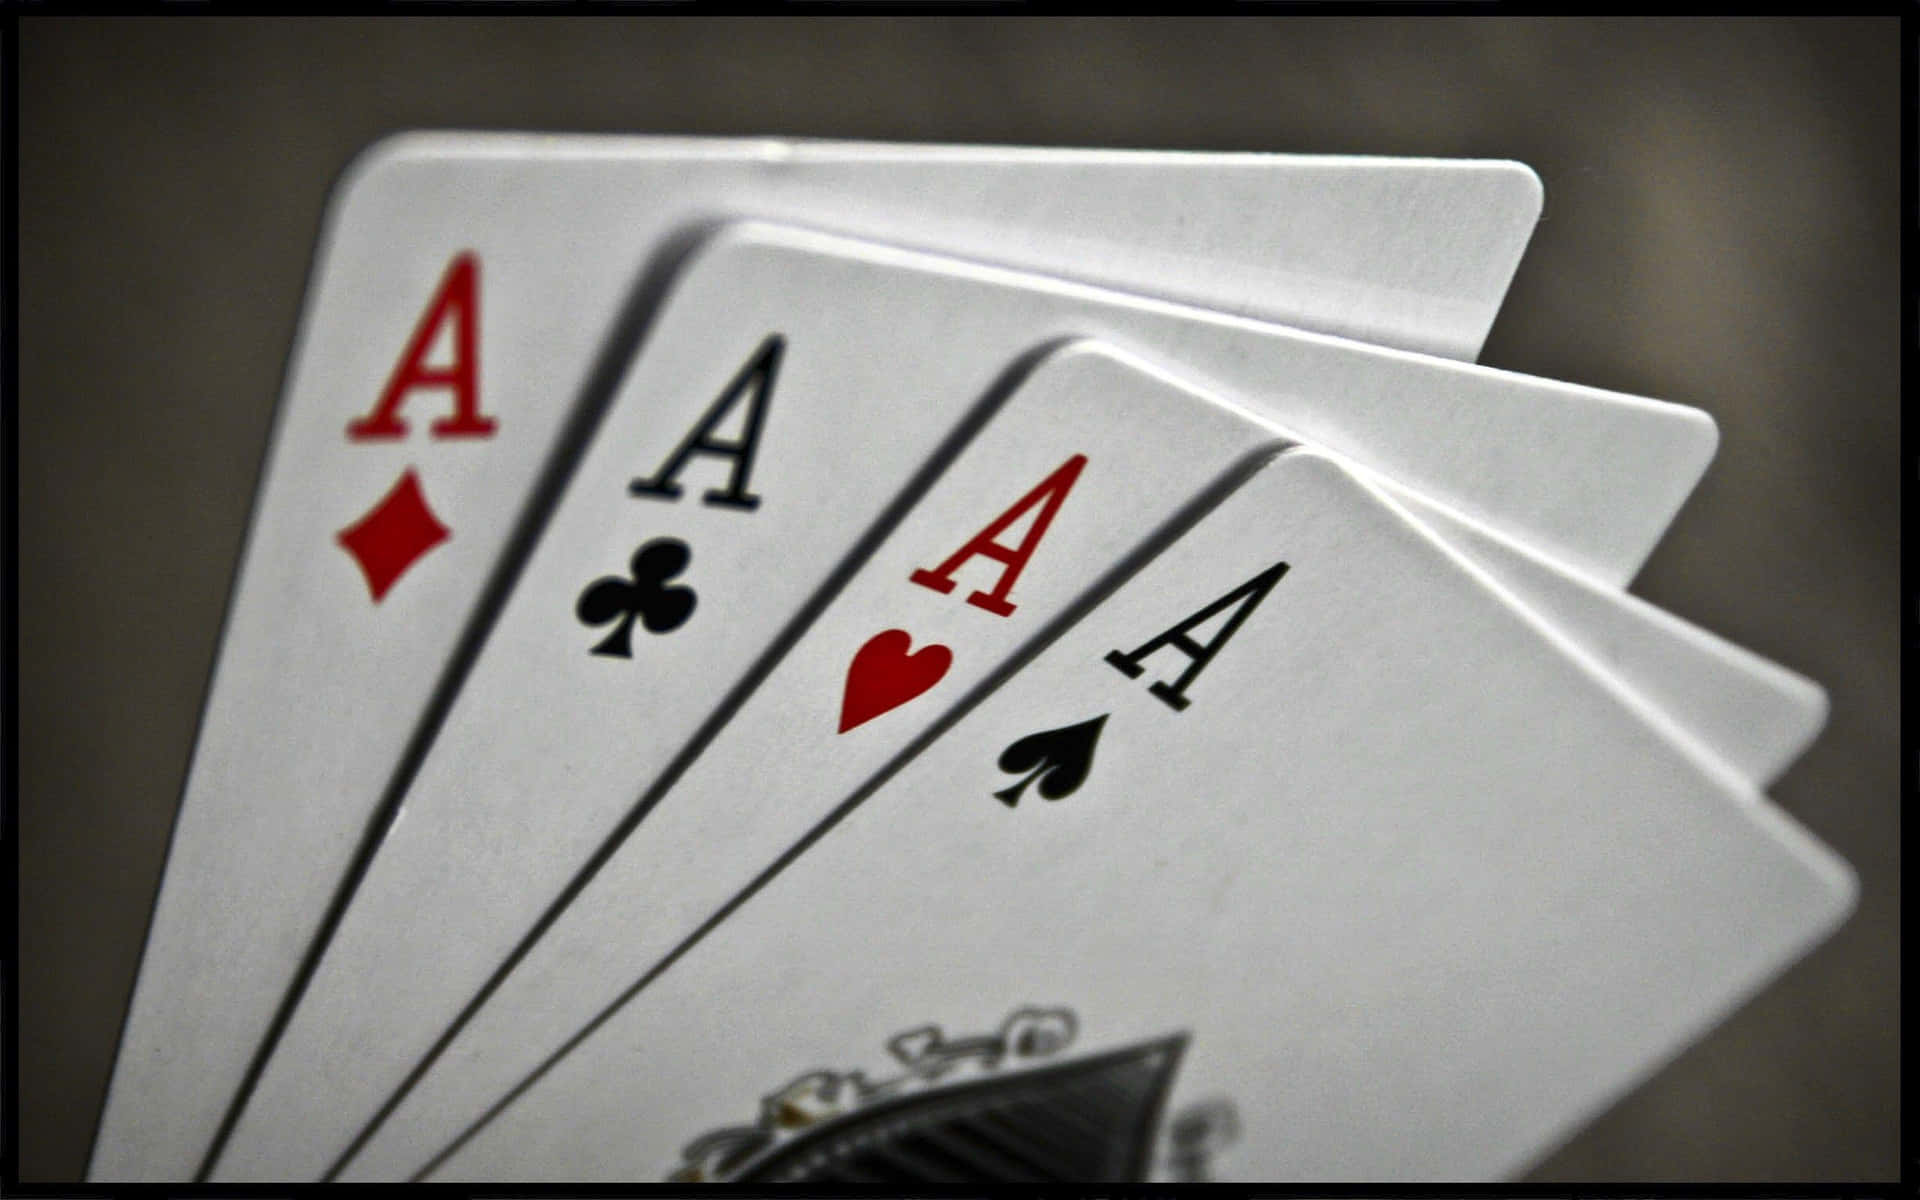 A royal flush - the ultimate hand in card games Wallpaper